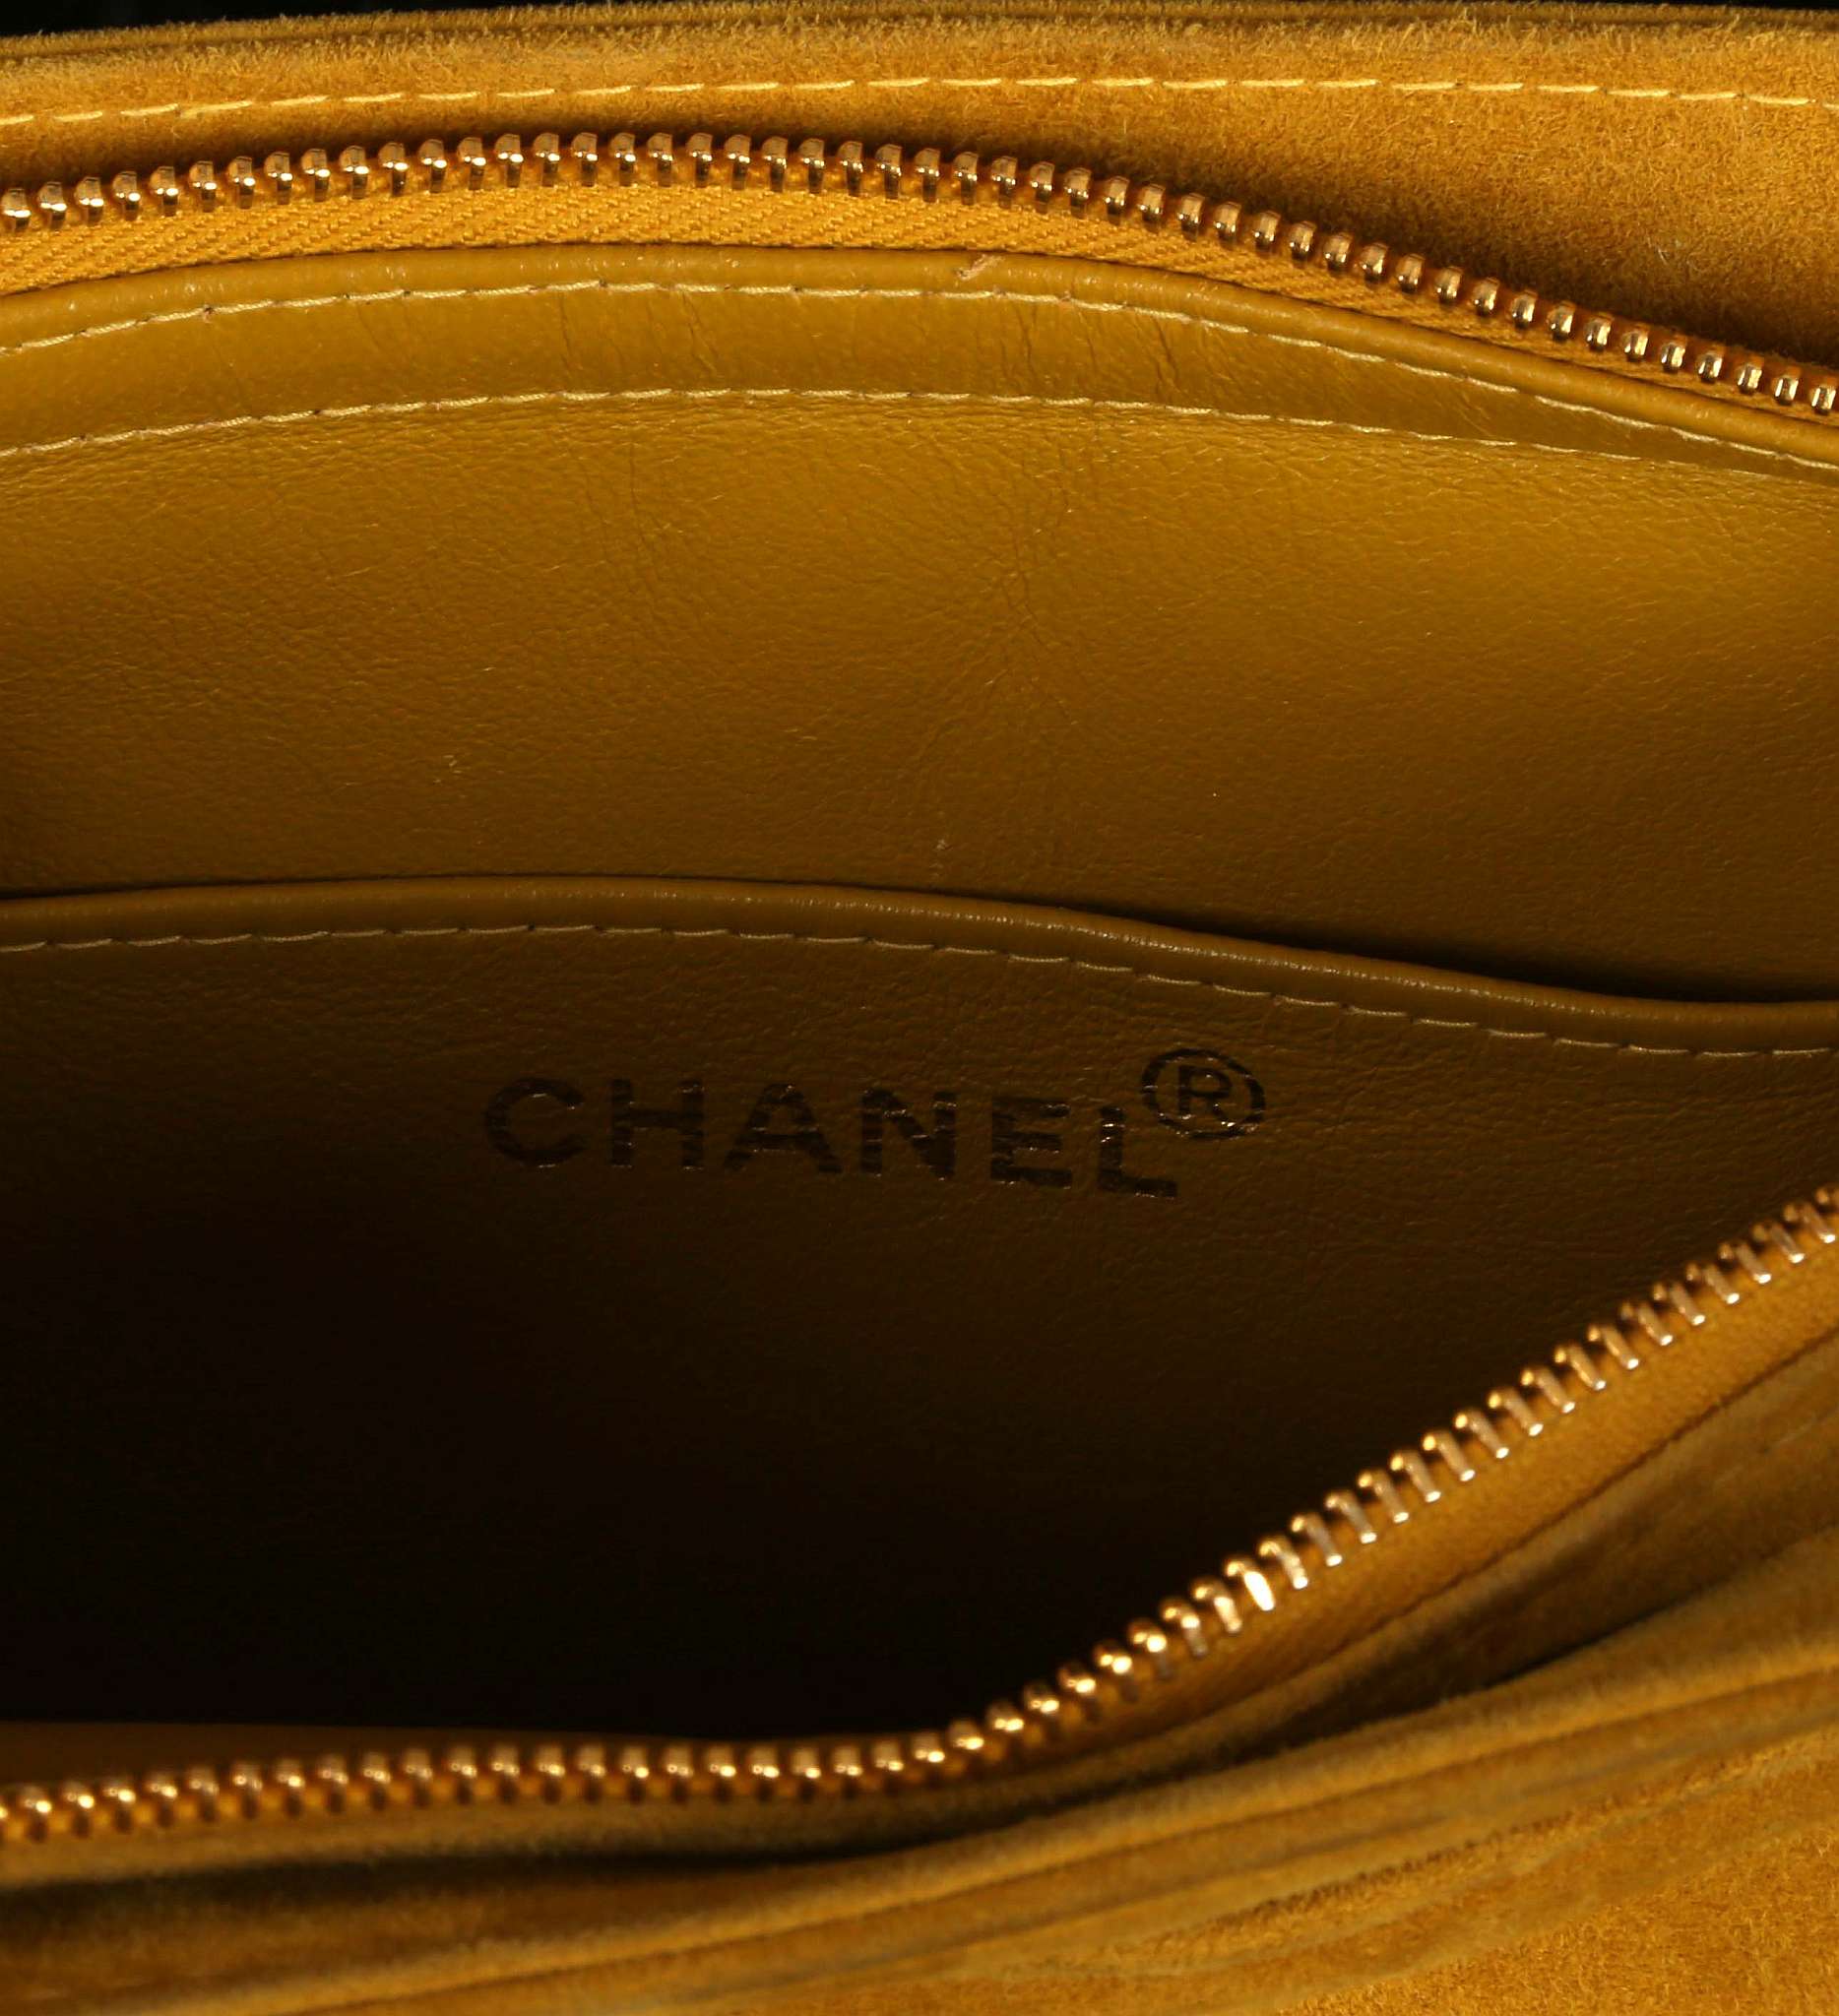 CHANEL EVENING BAG, date code for 1998, mustard ye - Image 7 of 8